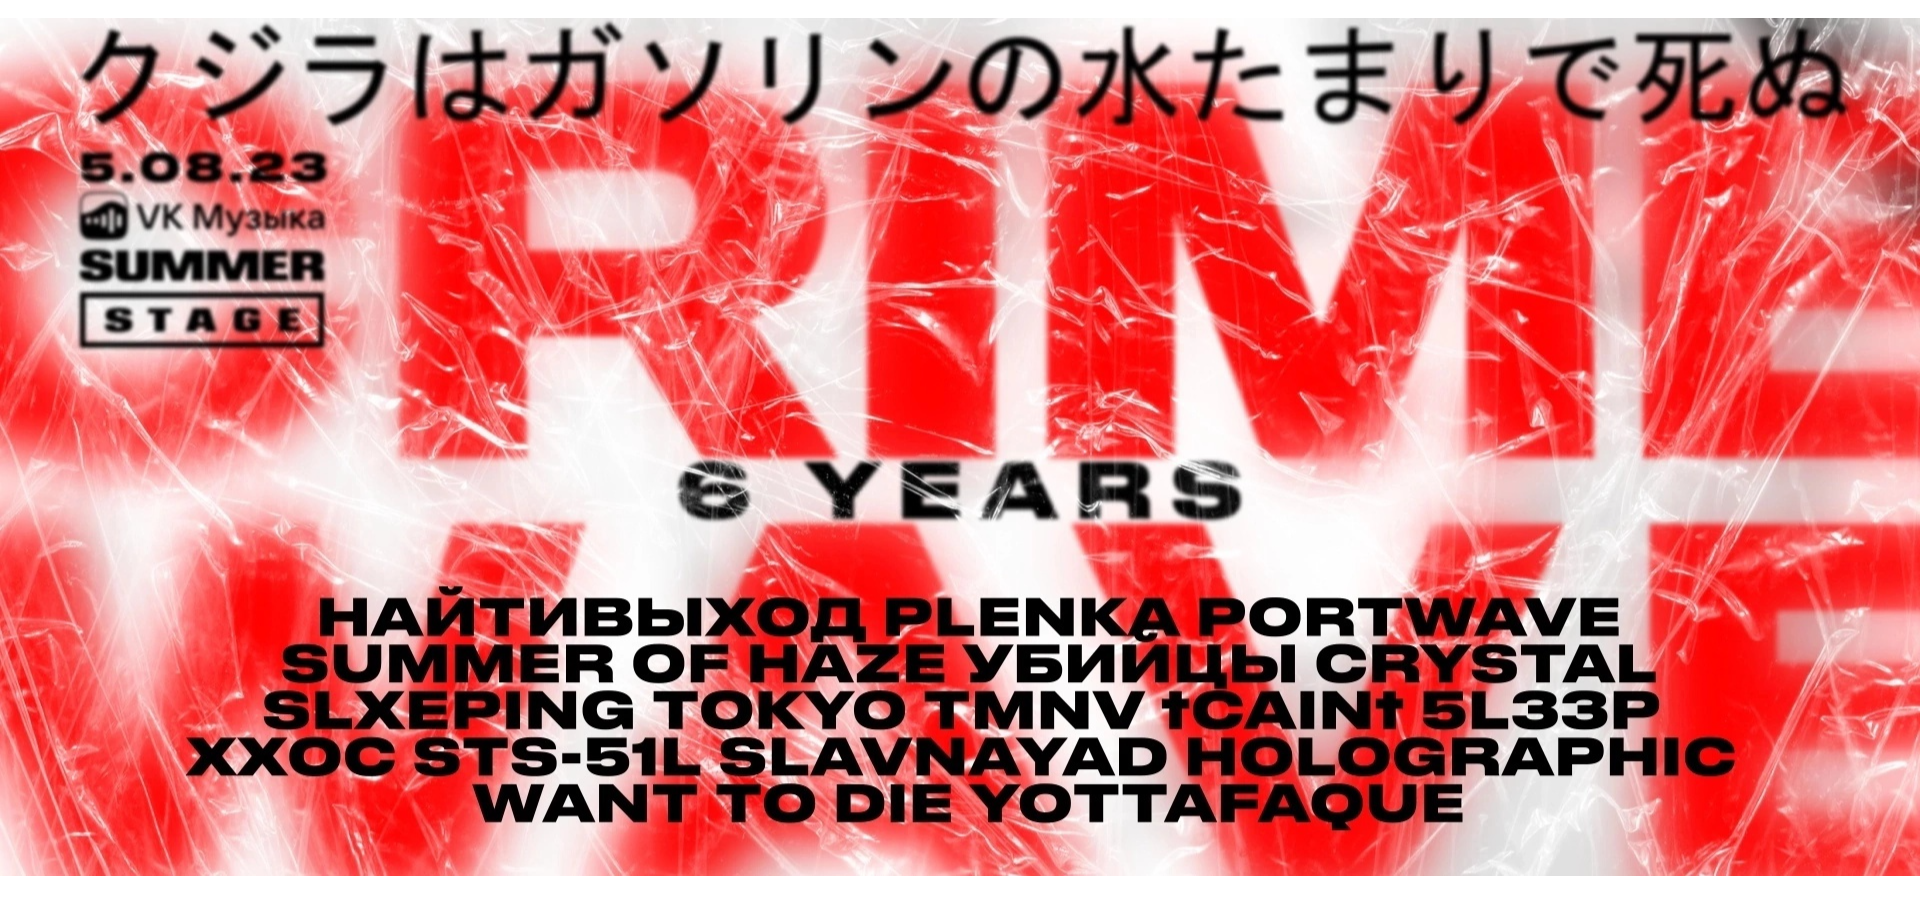 Lonelium slxeping tokyo. Crimewave XIV open Air. Crimewave XIV open Air | 6 years. Crimewave Moscow. Crimewave Speed up.